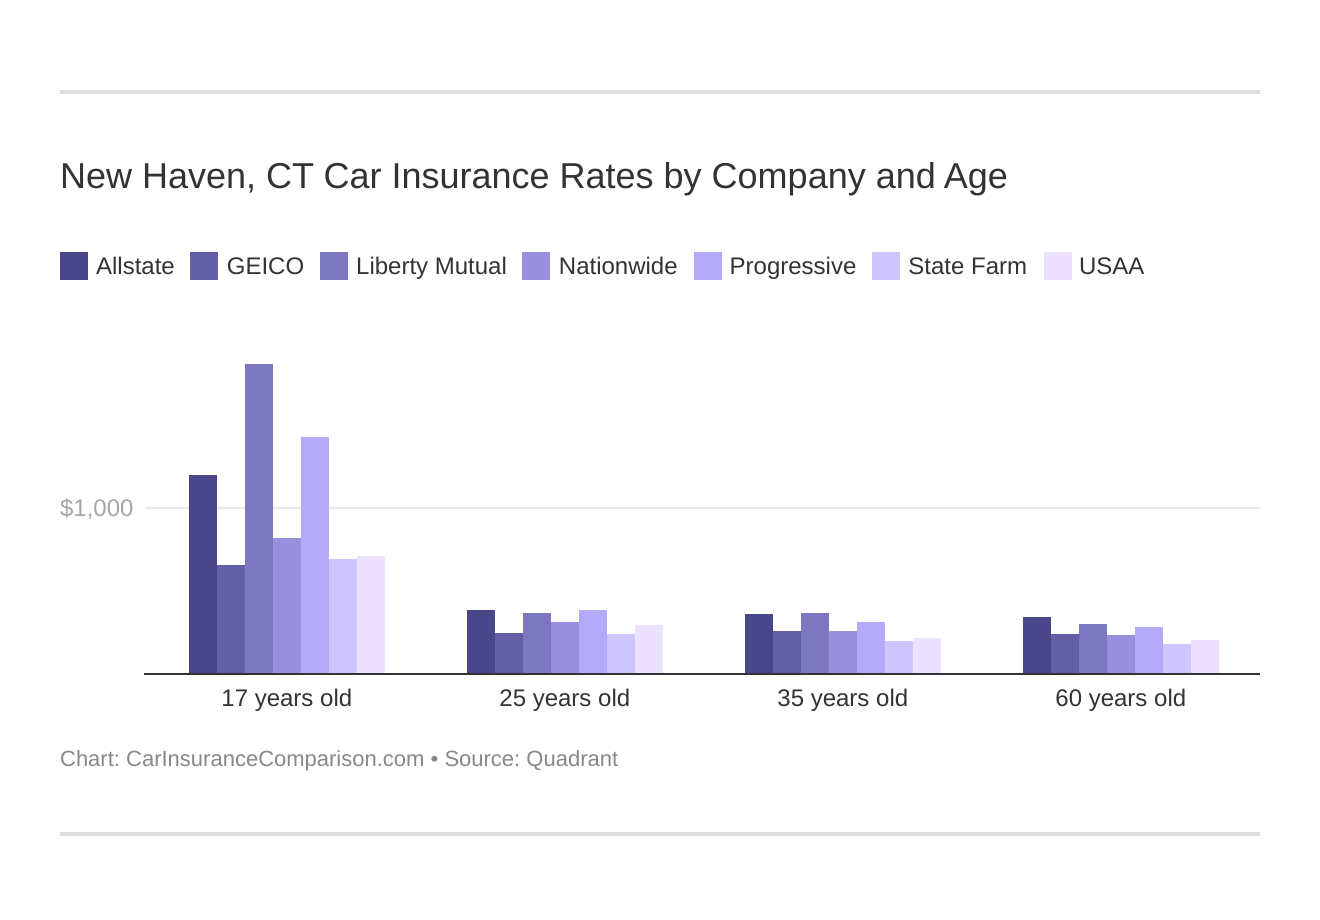 New Haven, CT Car Insurance Rates by Company and Age